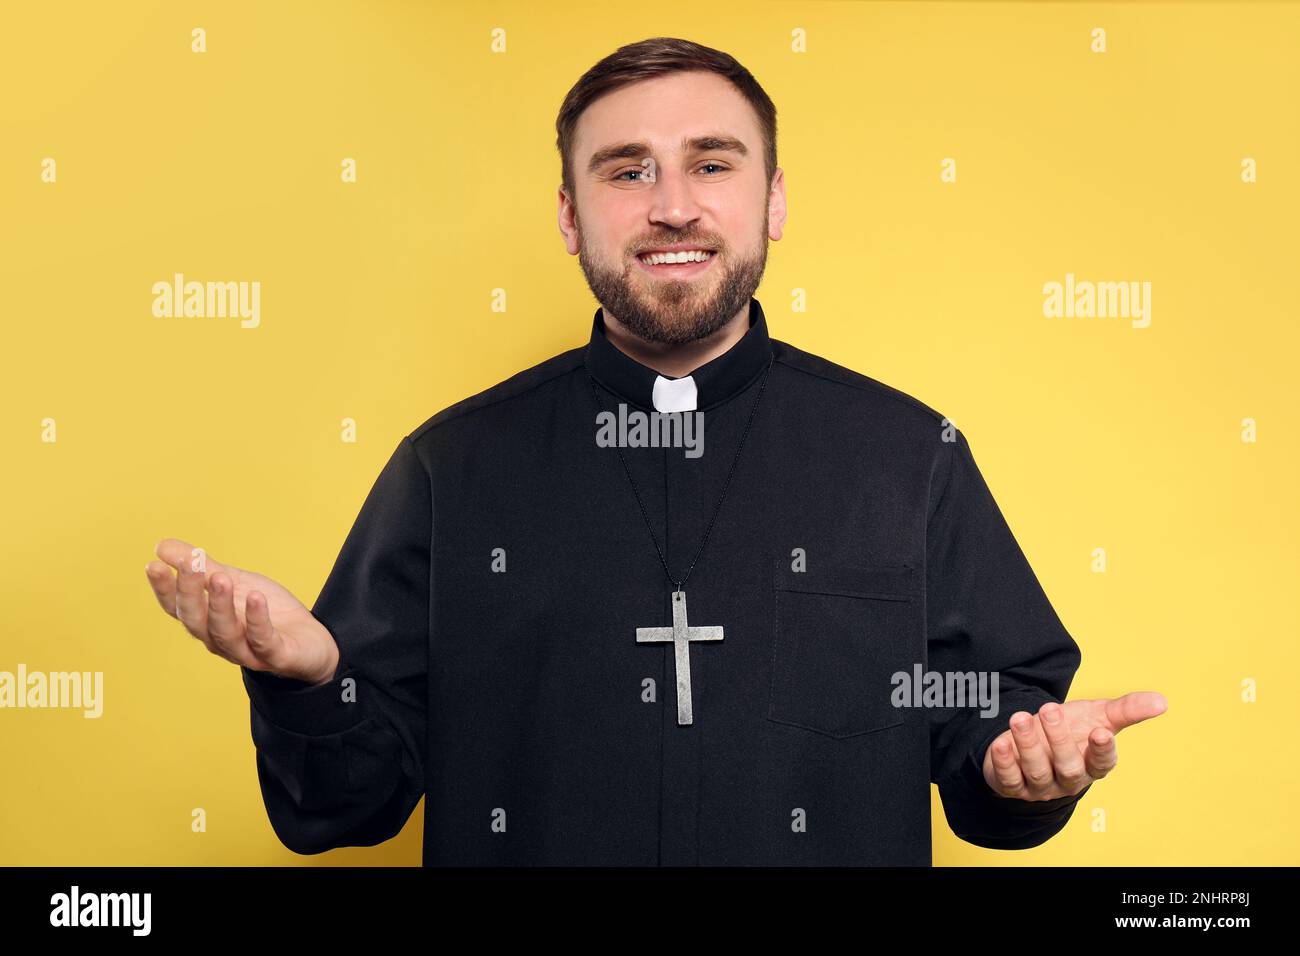 Priest wearing cassock with clerical collar on yellow background Stock Photo